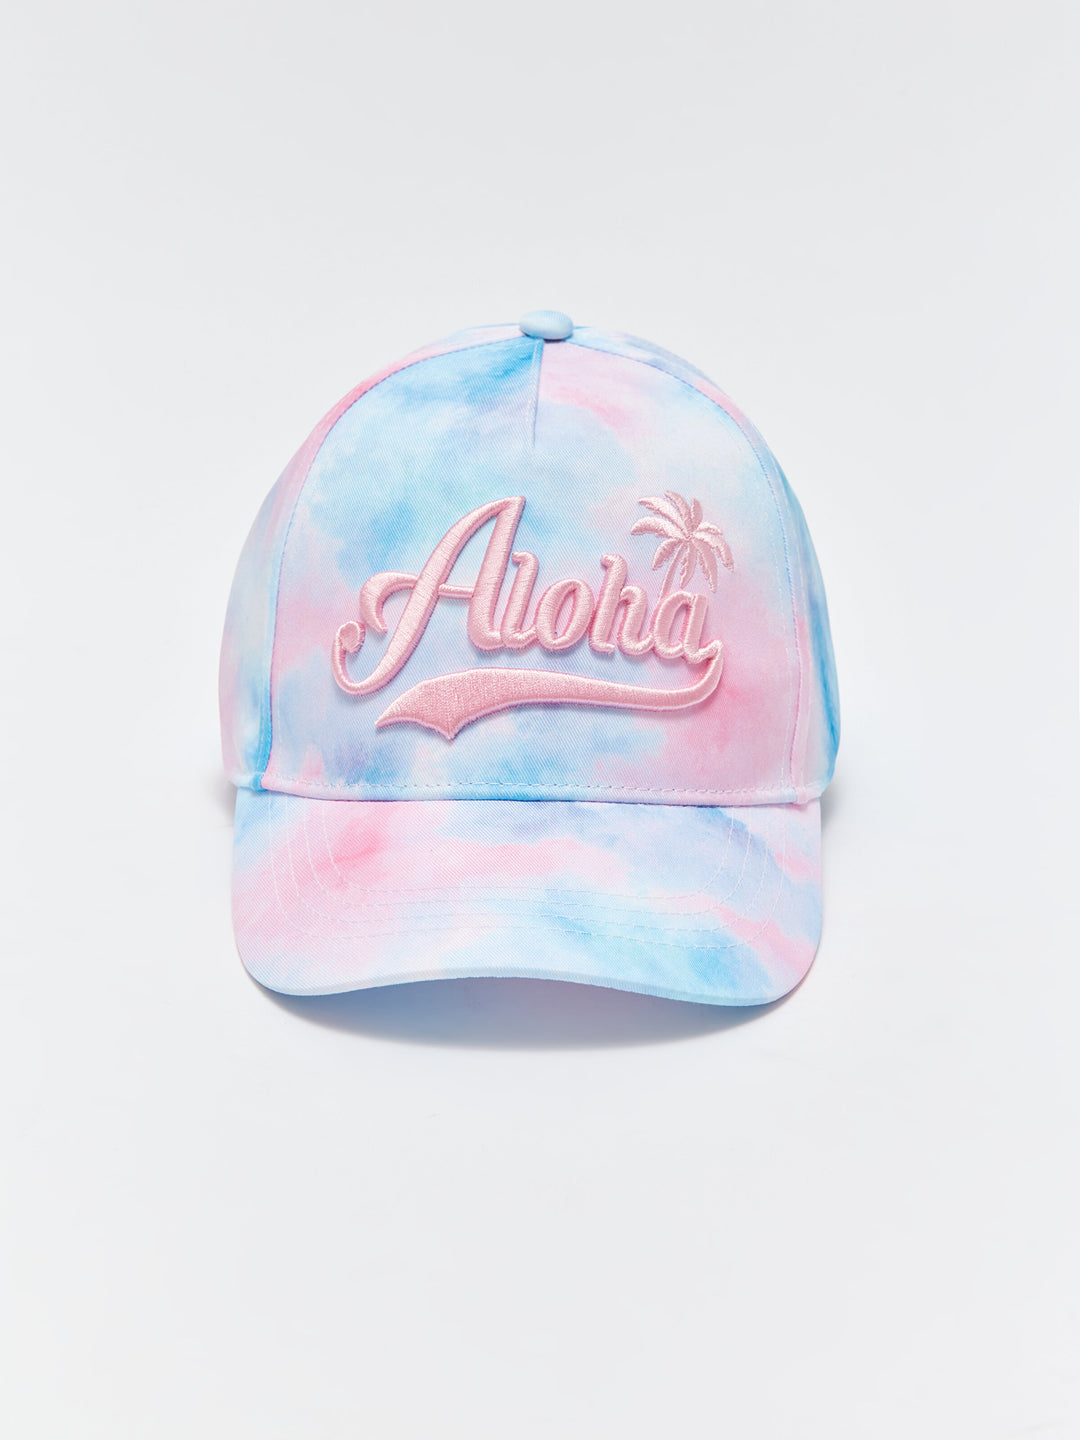 Embroidered Girls Cap Hat